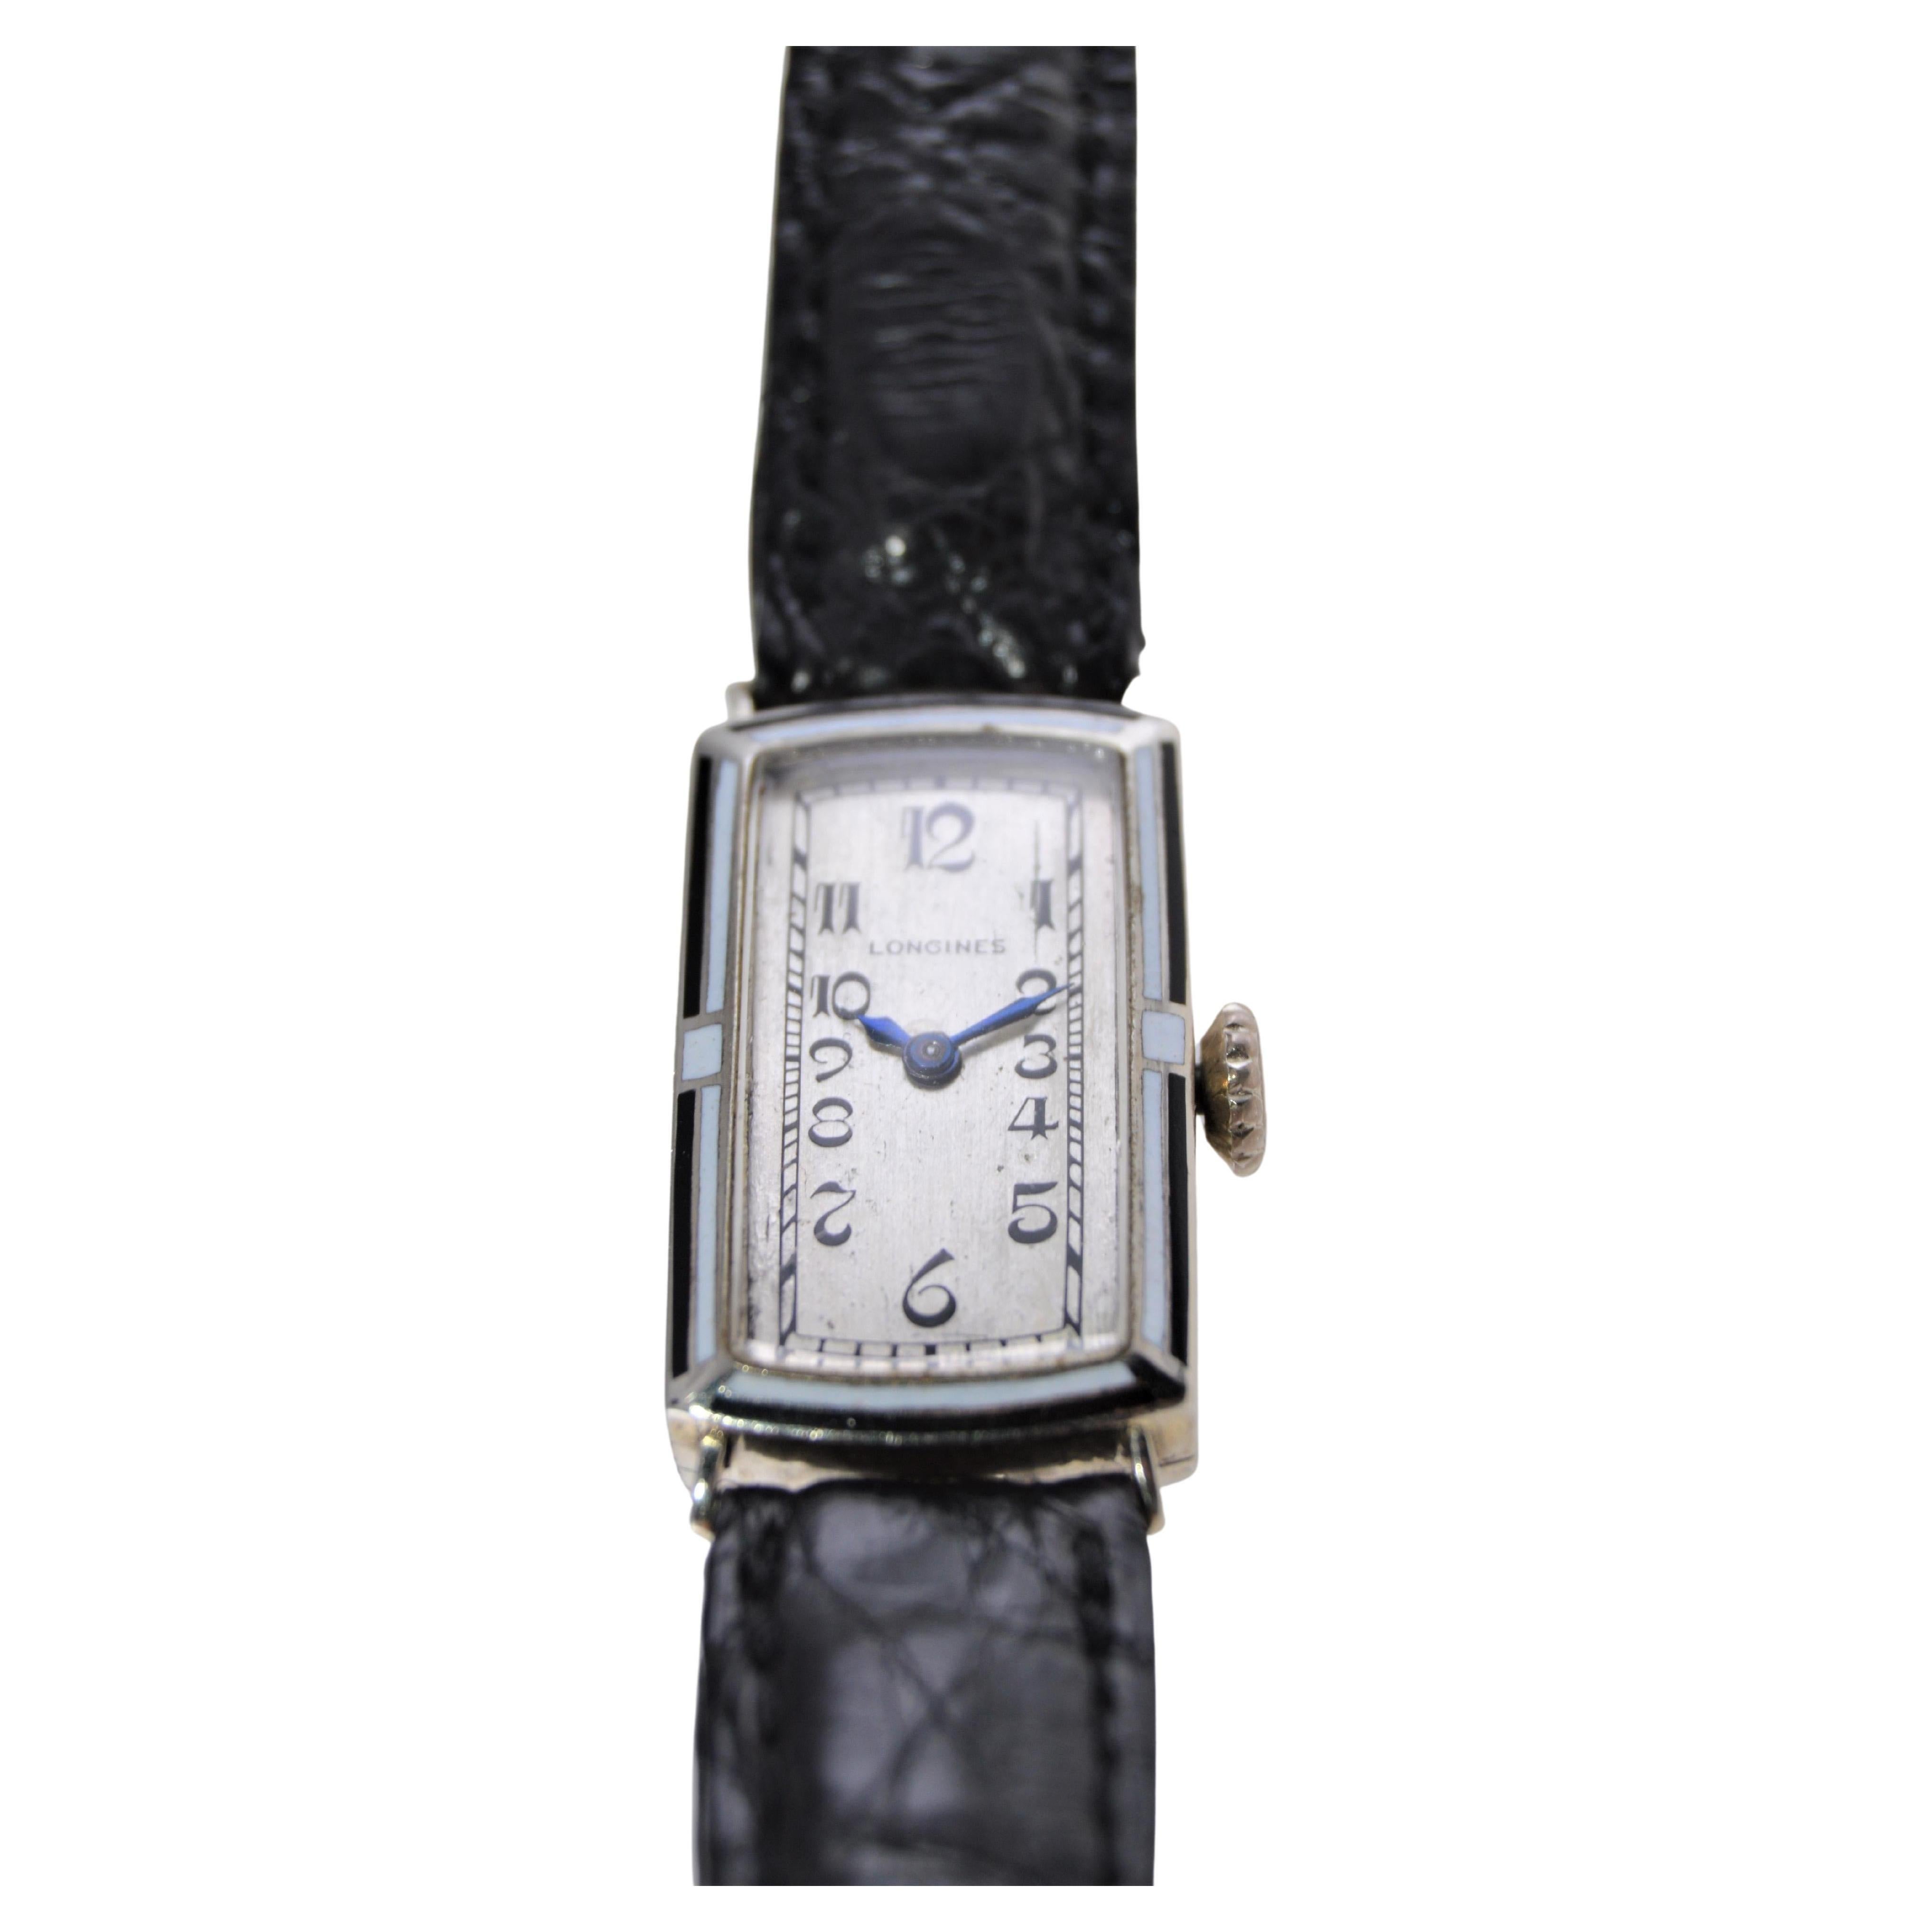 Women's Longines 14Kt. White Gold and Enamel Art Deco Watch, Dial by Stern Freres 1930's For Sale